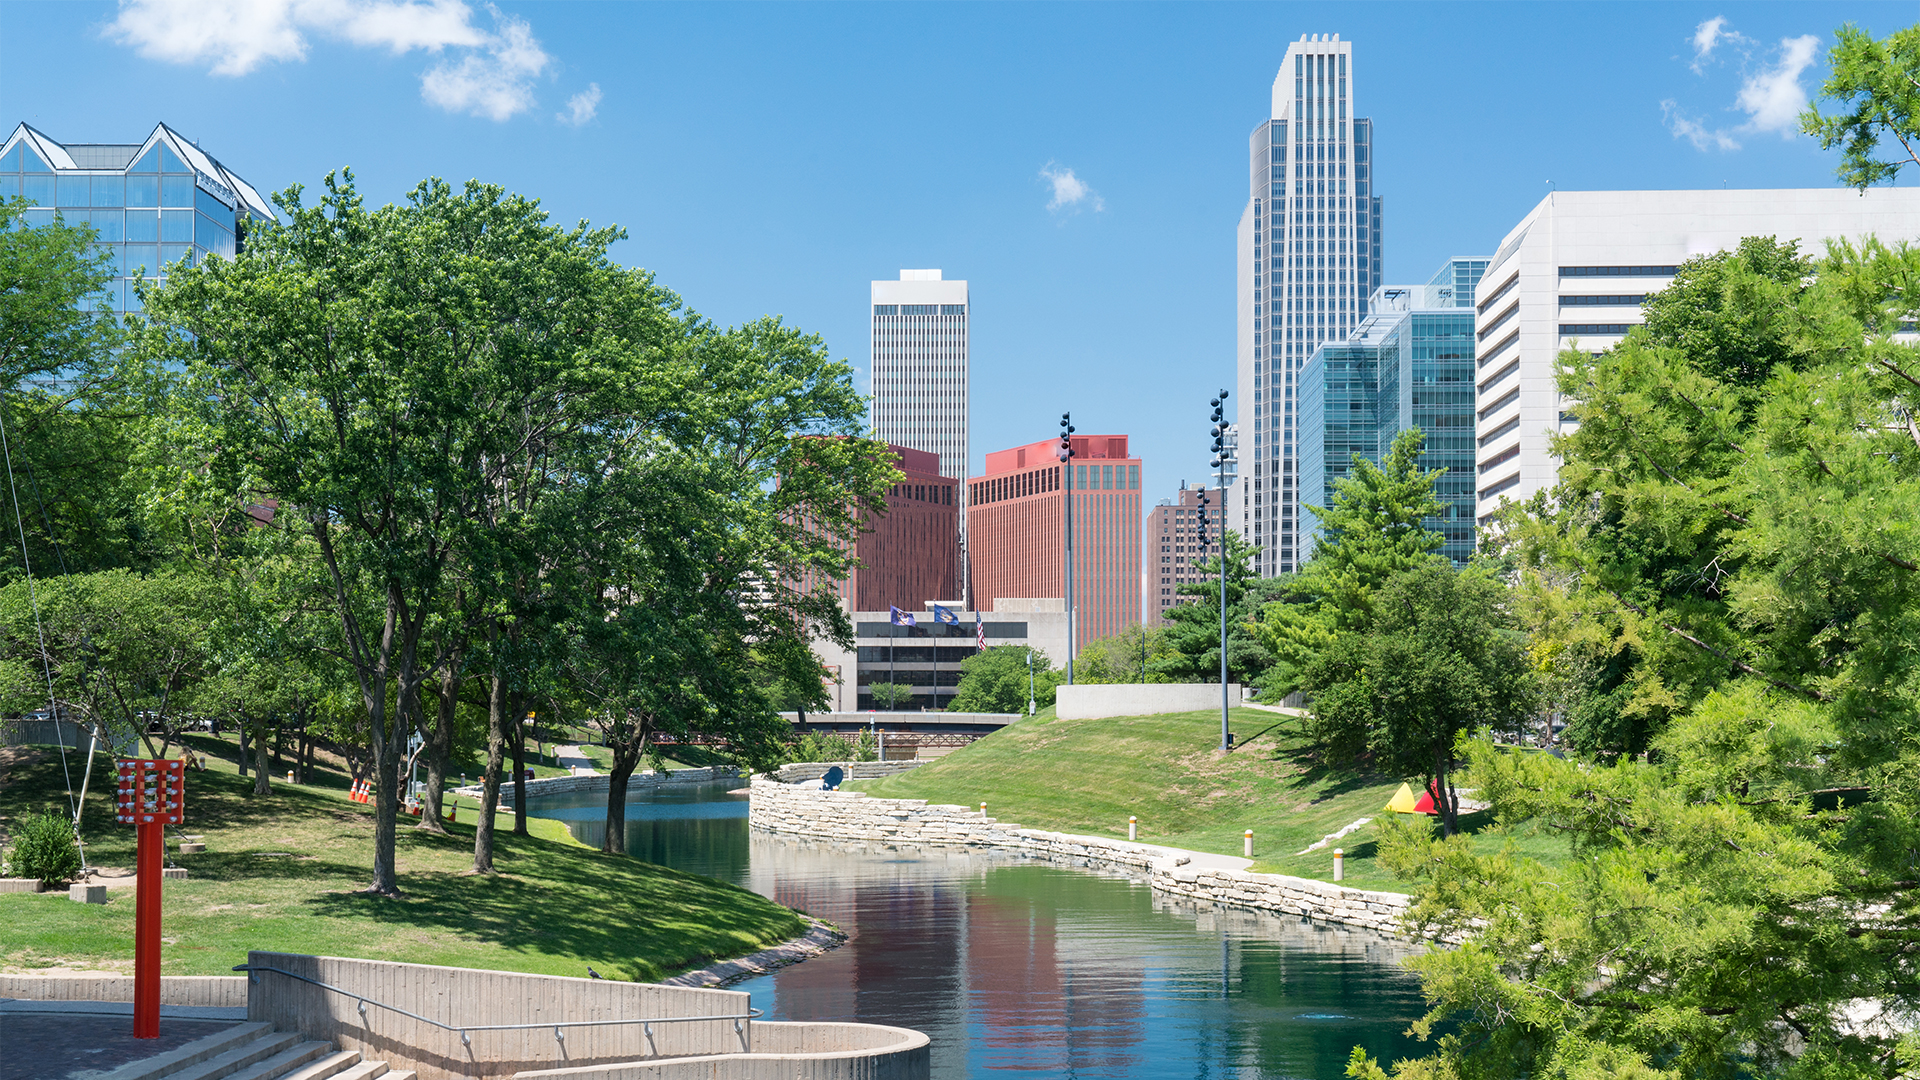 The riverfront in the city of Omaha with a view grassy hills, trees, the water, and the city skyline.